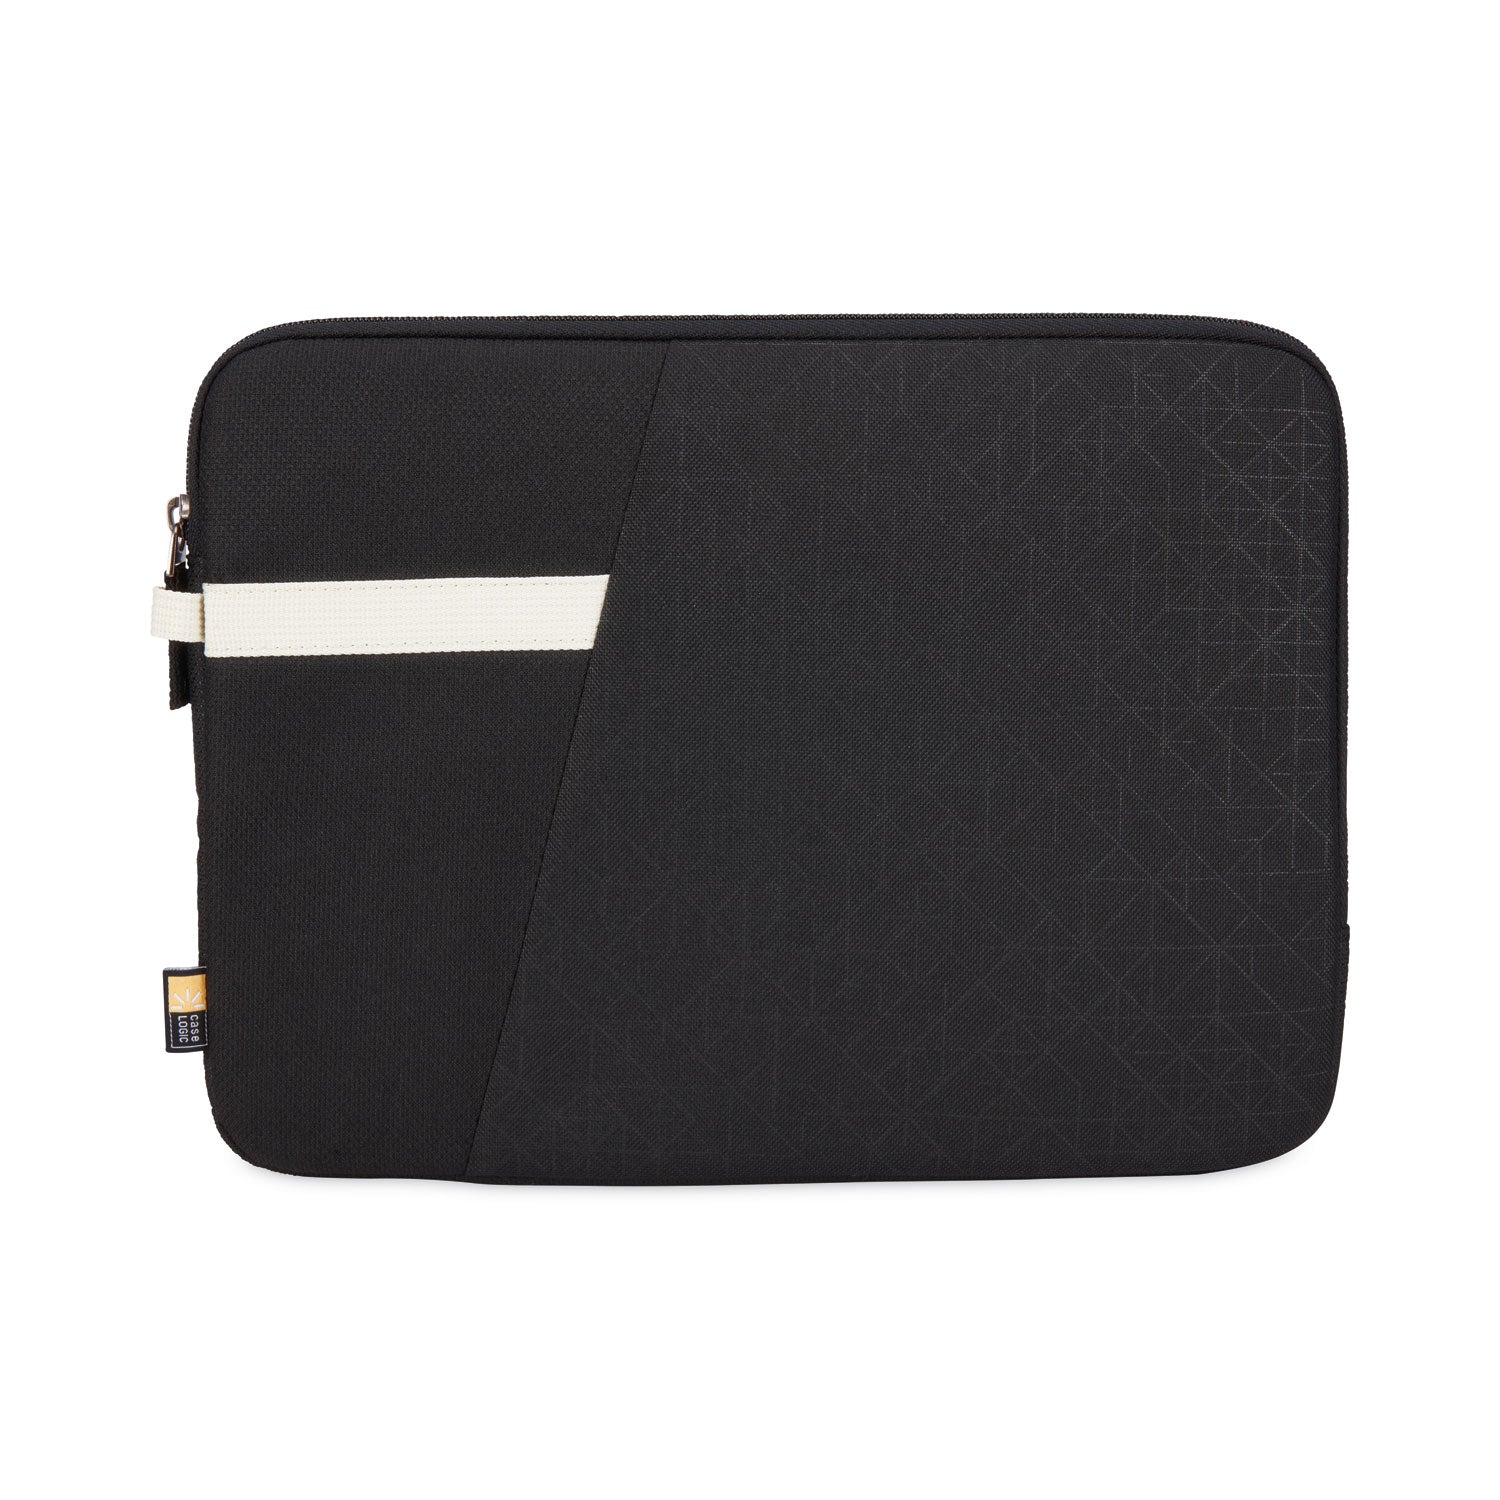 ibira-laptop-sleeve-fits-devices-up-to-116-polyester-126-x-12-x-94-black_clg3204389 - 1